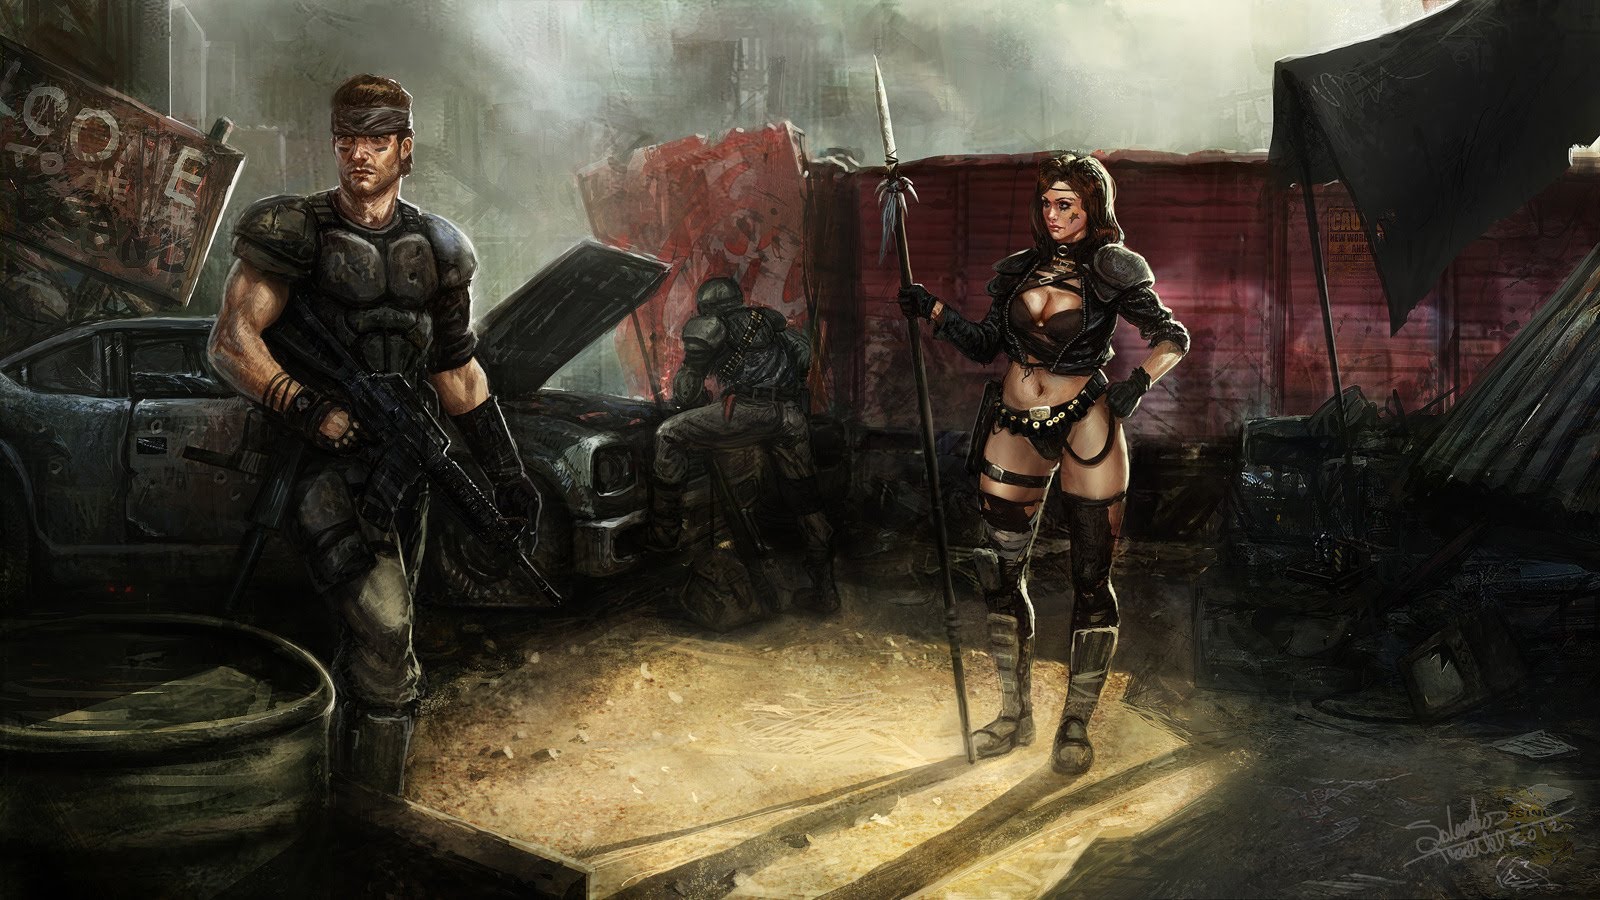 Wasteland 2 Backgrounds, Compatible - PC, Mobile, Gadgets| 1600x900 px